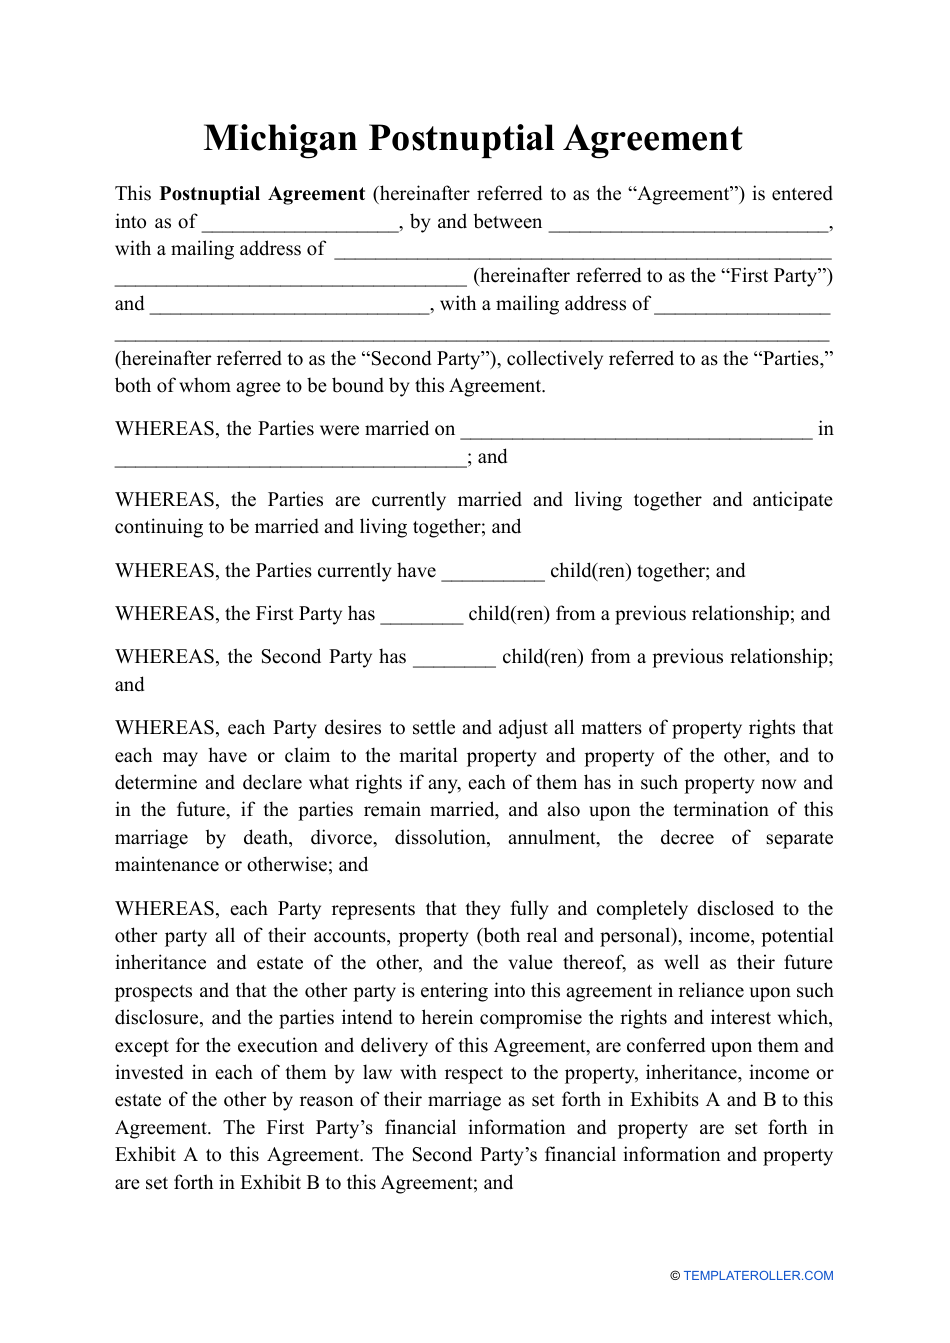 Postnuptial Agreement Template - Michigan, Page 1